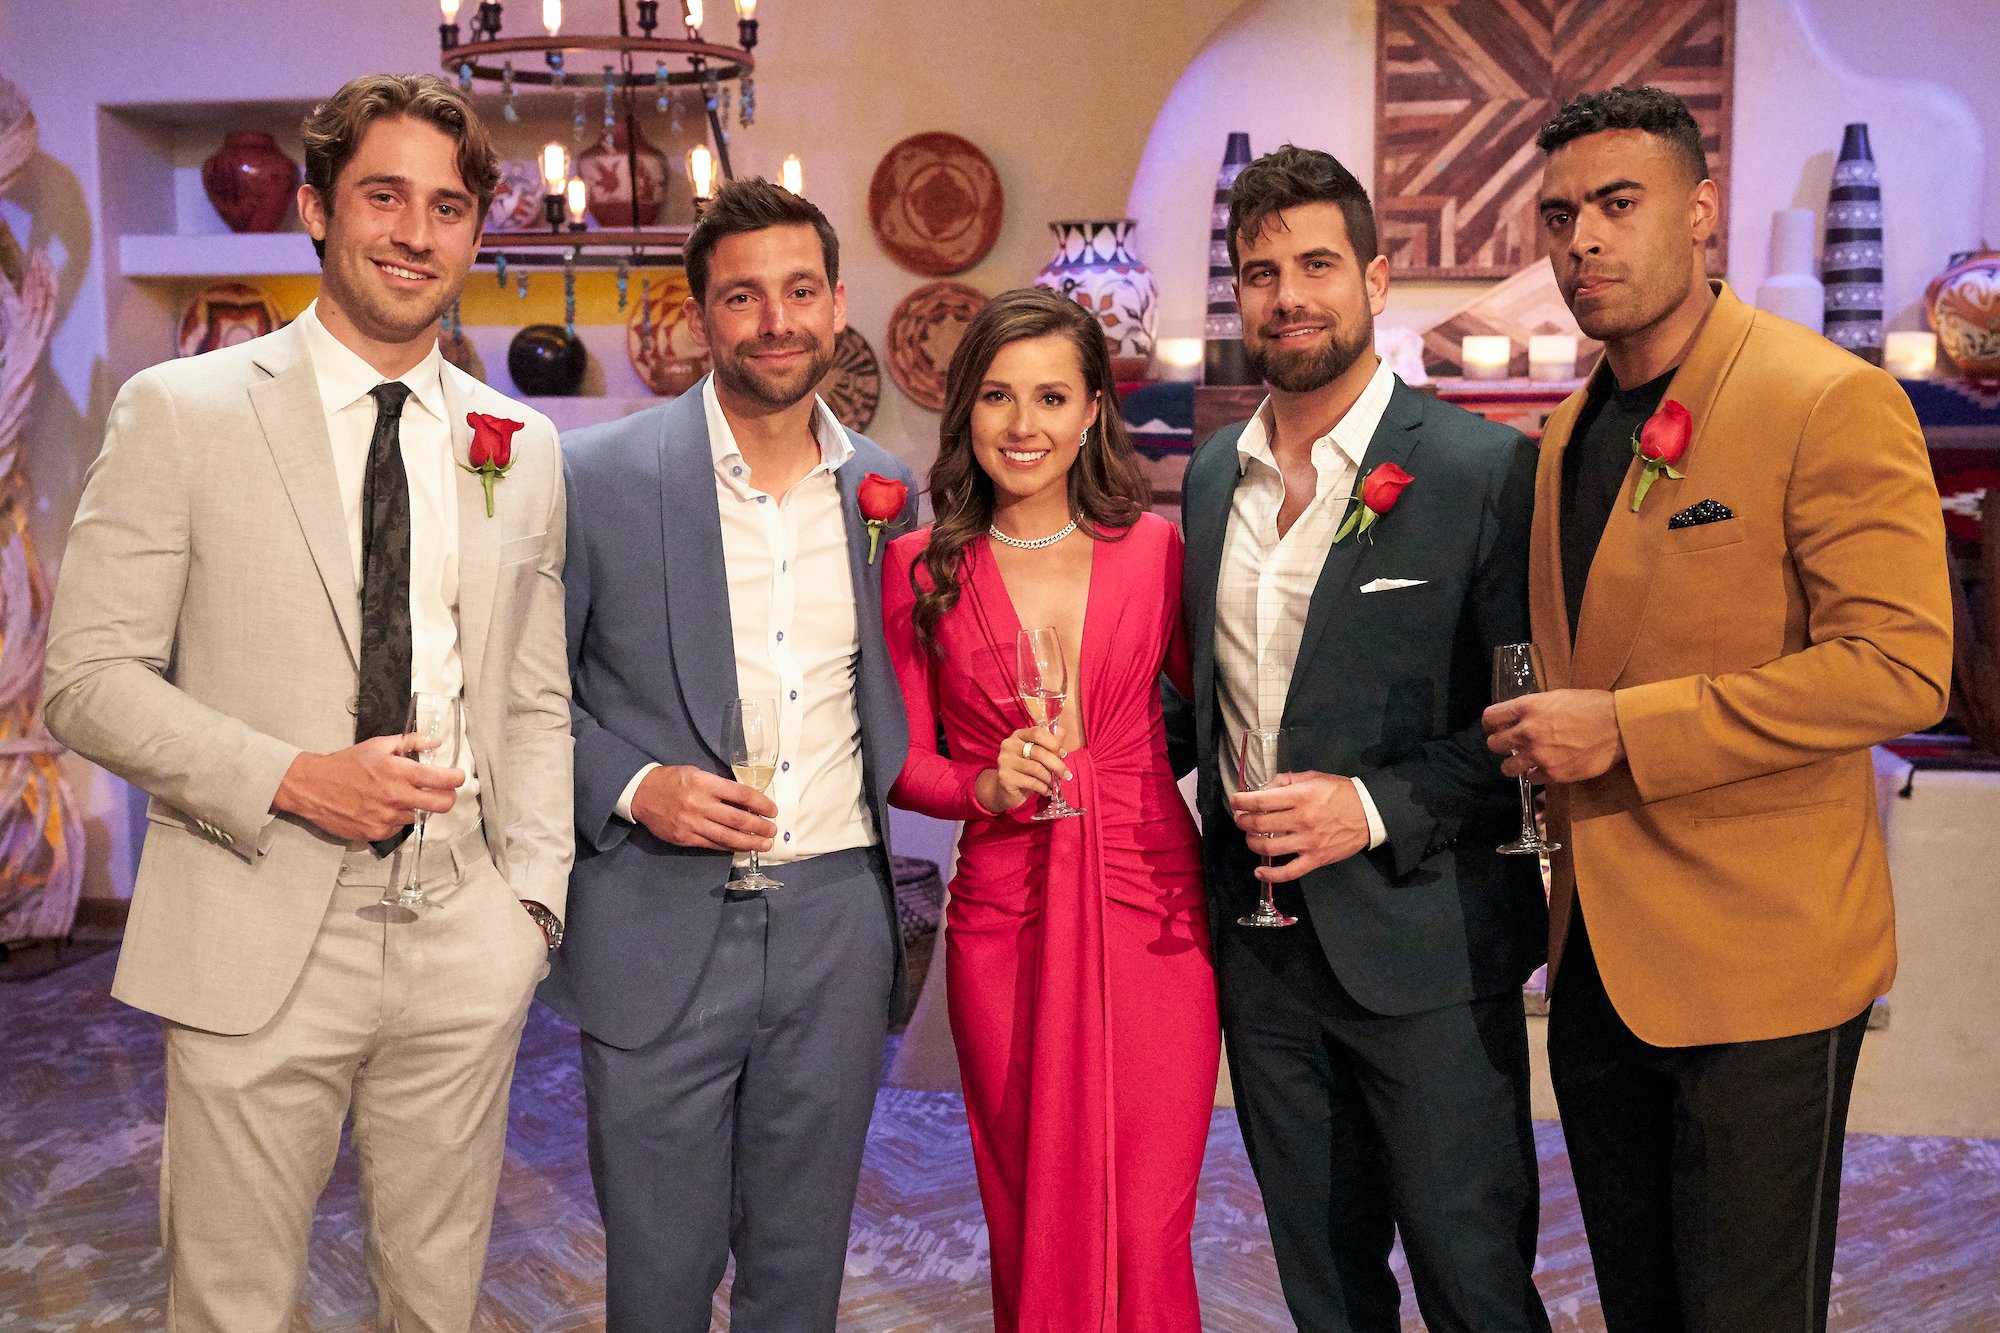 GREG GRIPPO, MICHAEL A., KATIE THURSTON, BLAKE MOYNES, and JUSTIN GLAZE from 'The Bachelorette'